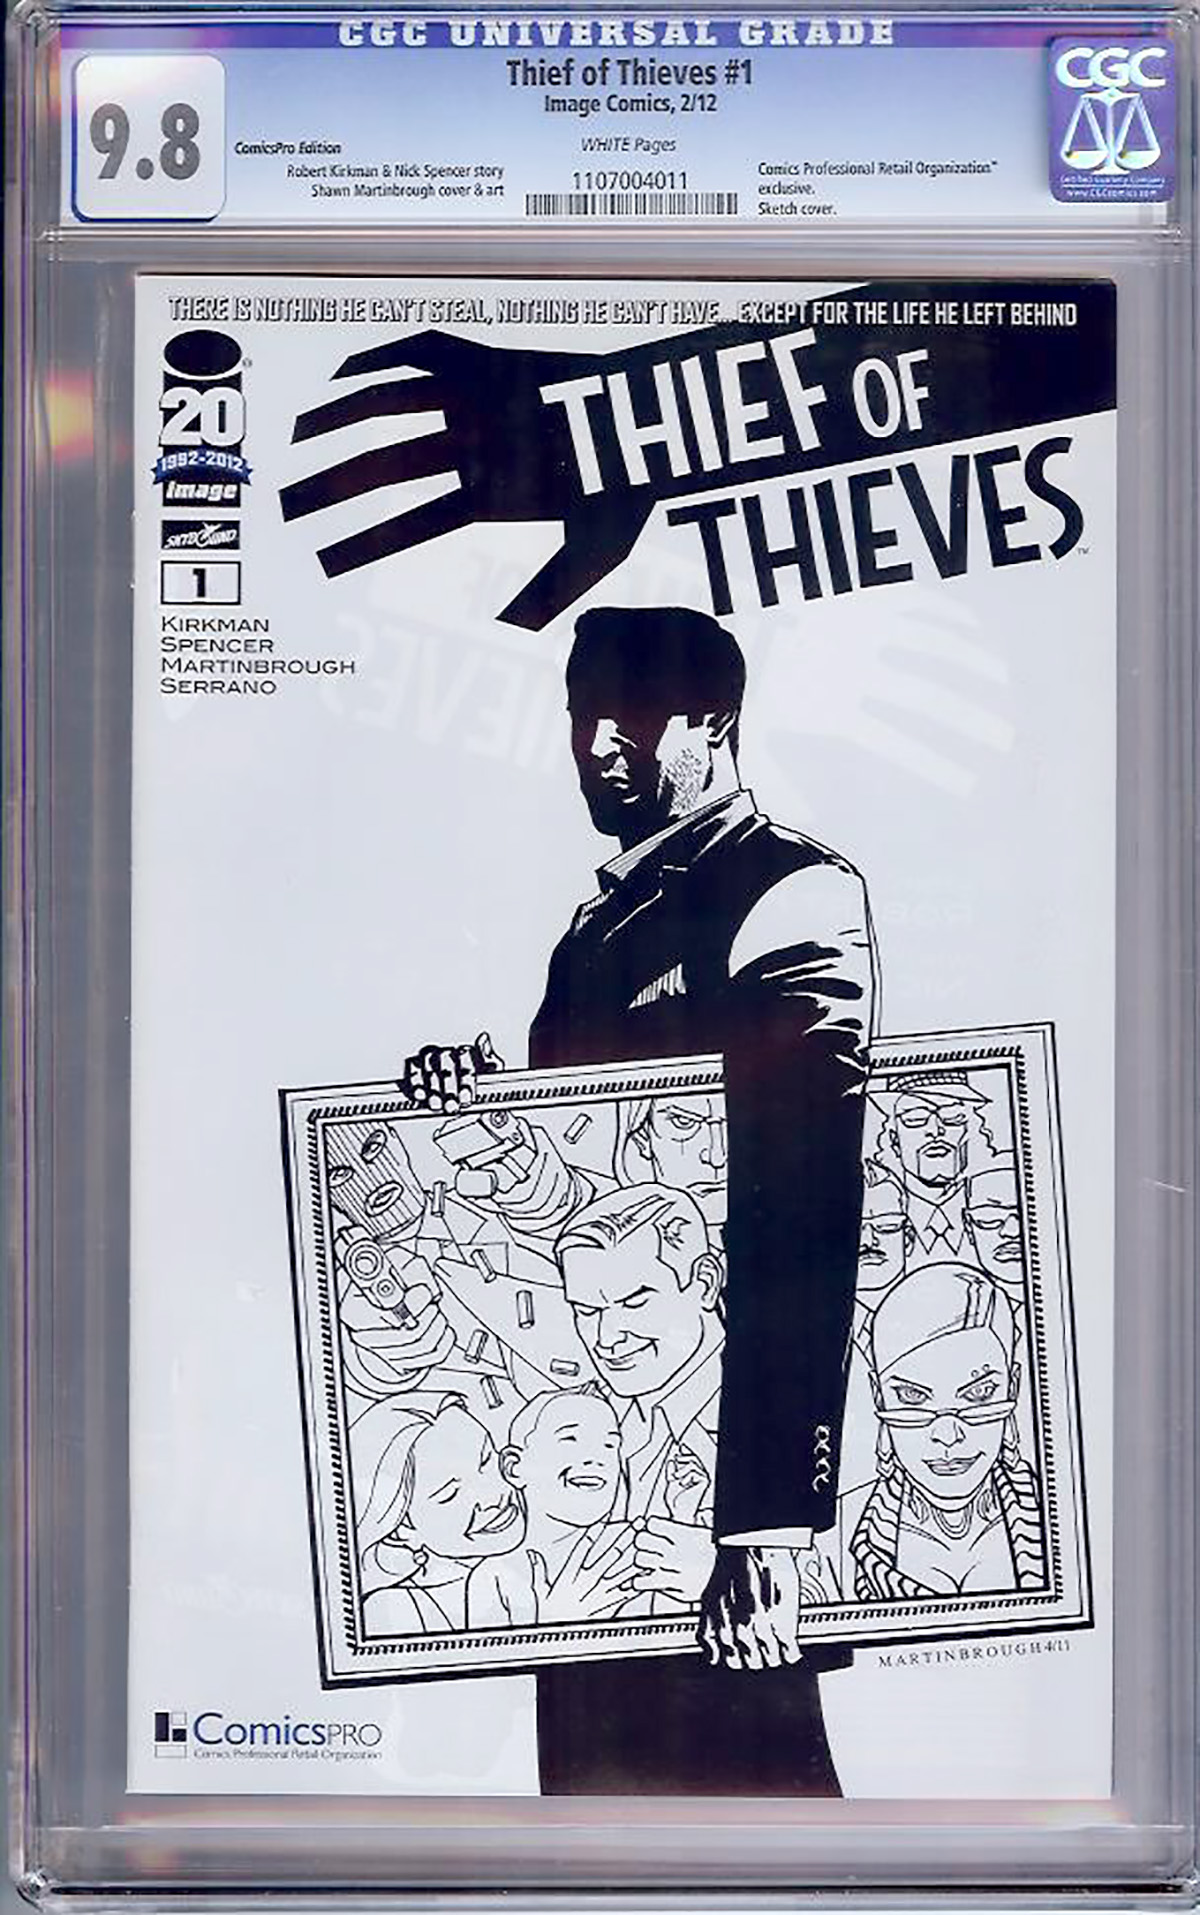 Thief of Thieves #1 CGC 9.8 w ComicsPro Edition